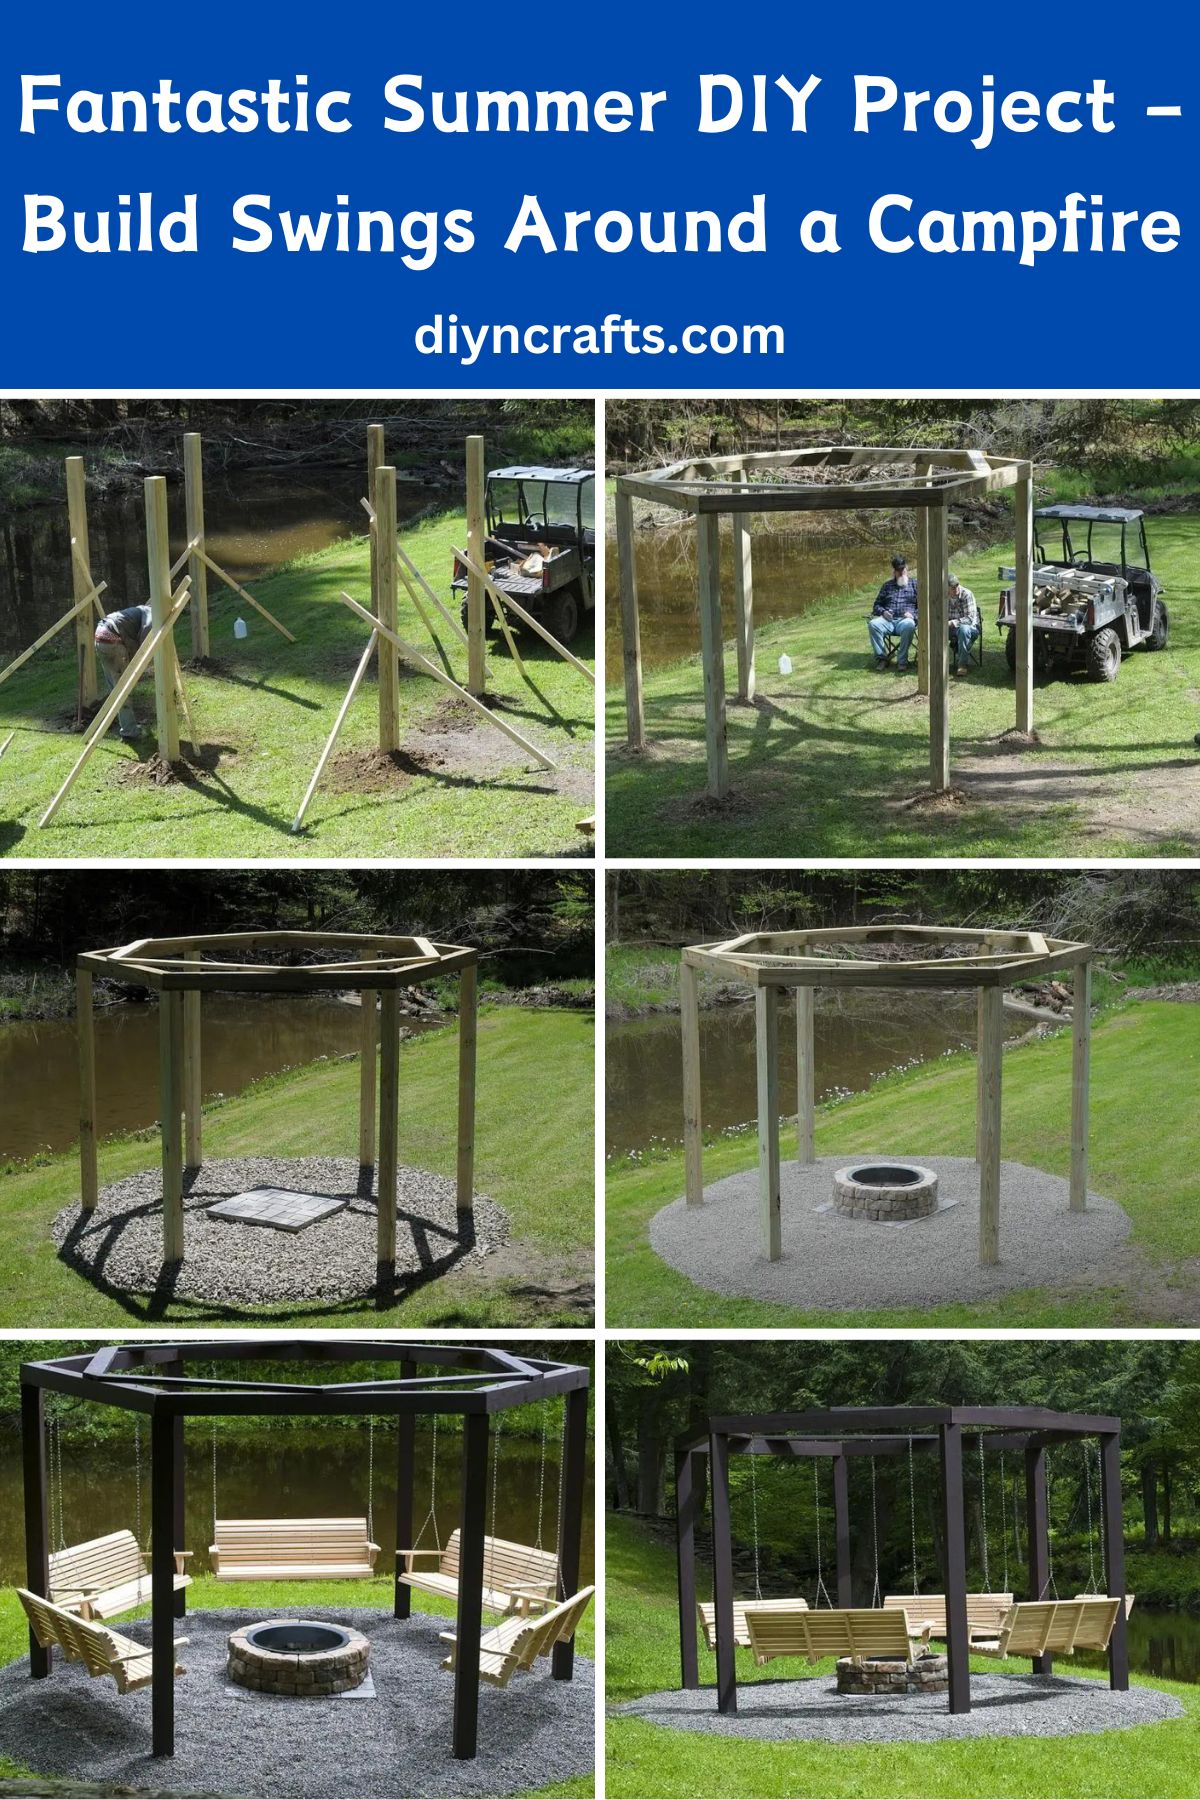 Fantastic Summer DIY Project – Build Swings Around a Campfire collage.